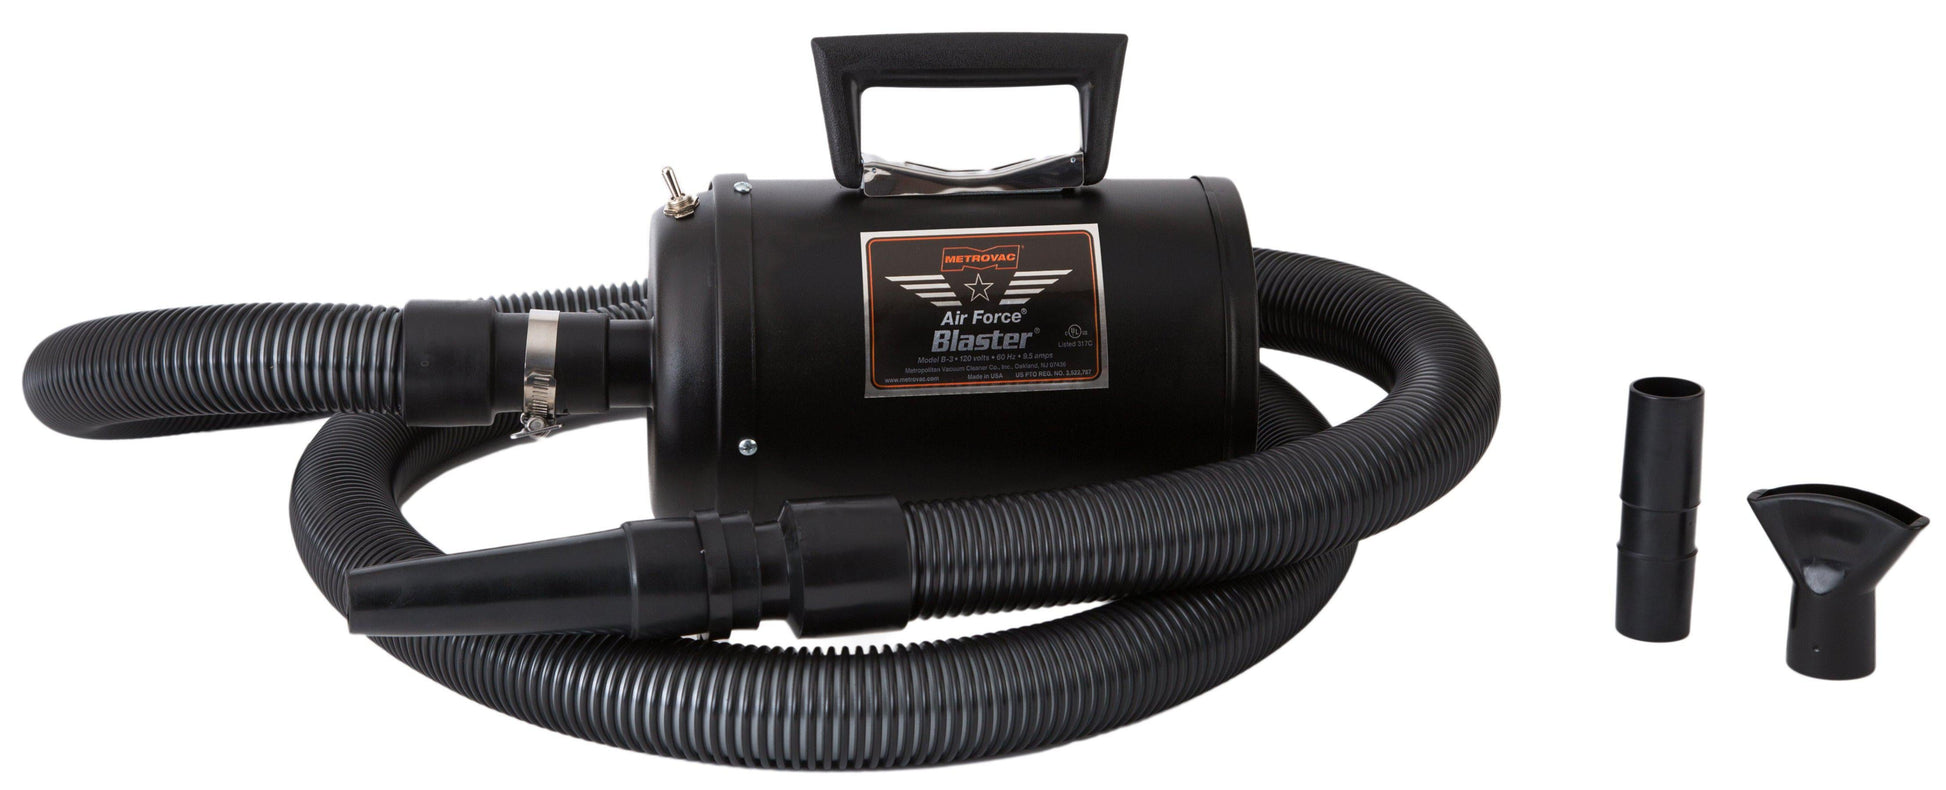 Metrovac Air Force Blaster Professional Grooming Dog & Pet Dryer-Dryers-Pet's Choice Supply